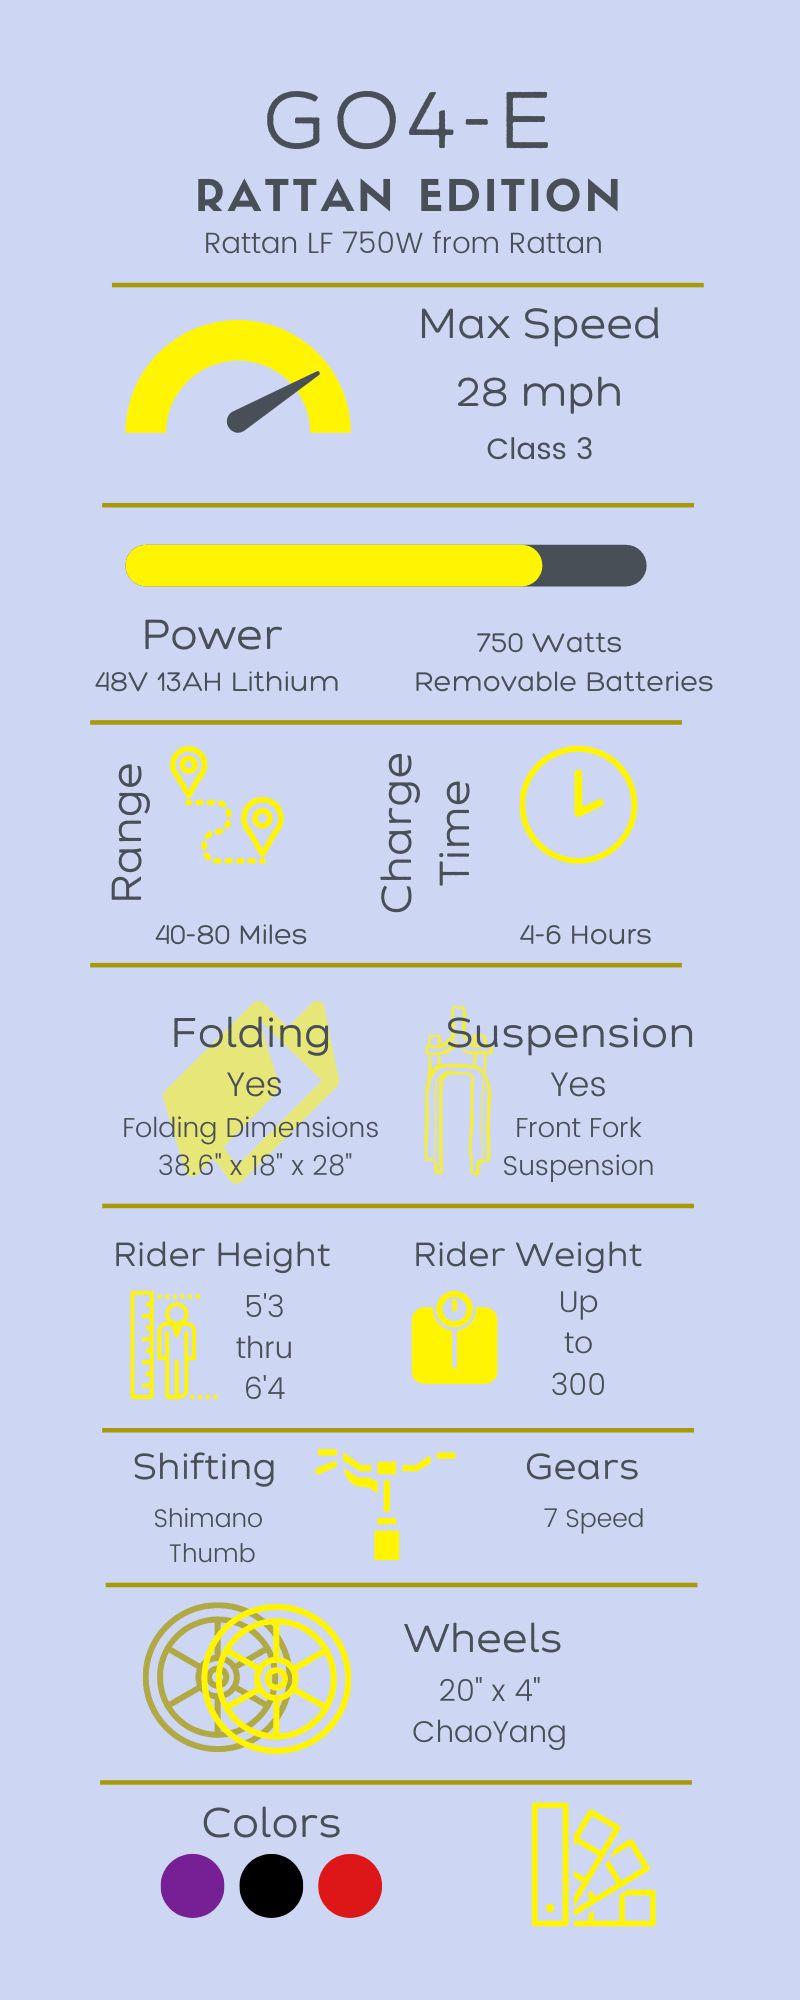 Infographic about the Rattan LF 750W eBike from Rattan that is compatible with the Go4-E Connection Kit to create a Blackbird Bikes Sociable Tandem side-by-side quadribike. This 4 wheel bicycle offers a stable ride inclusive for all abilities and adaptive to special needs riders.